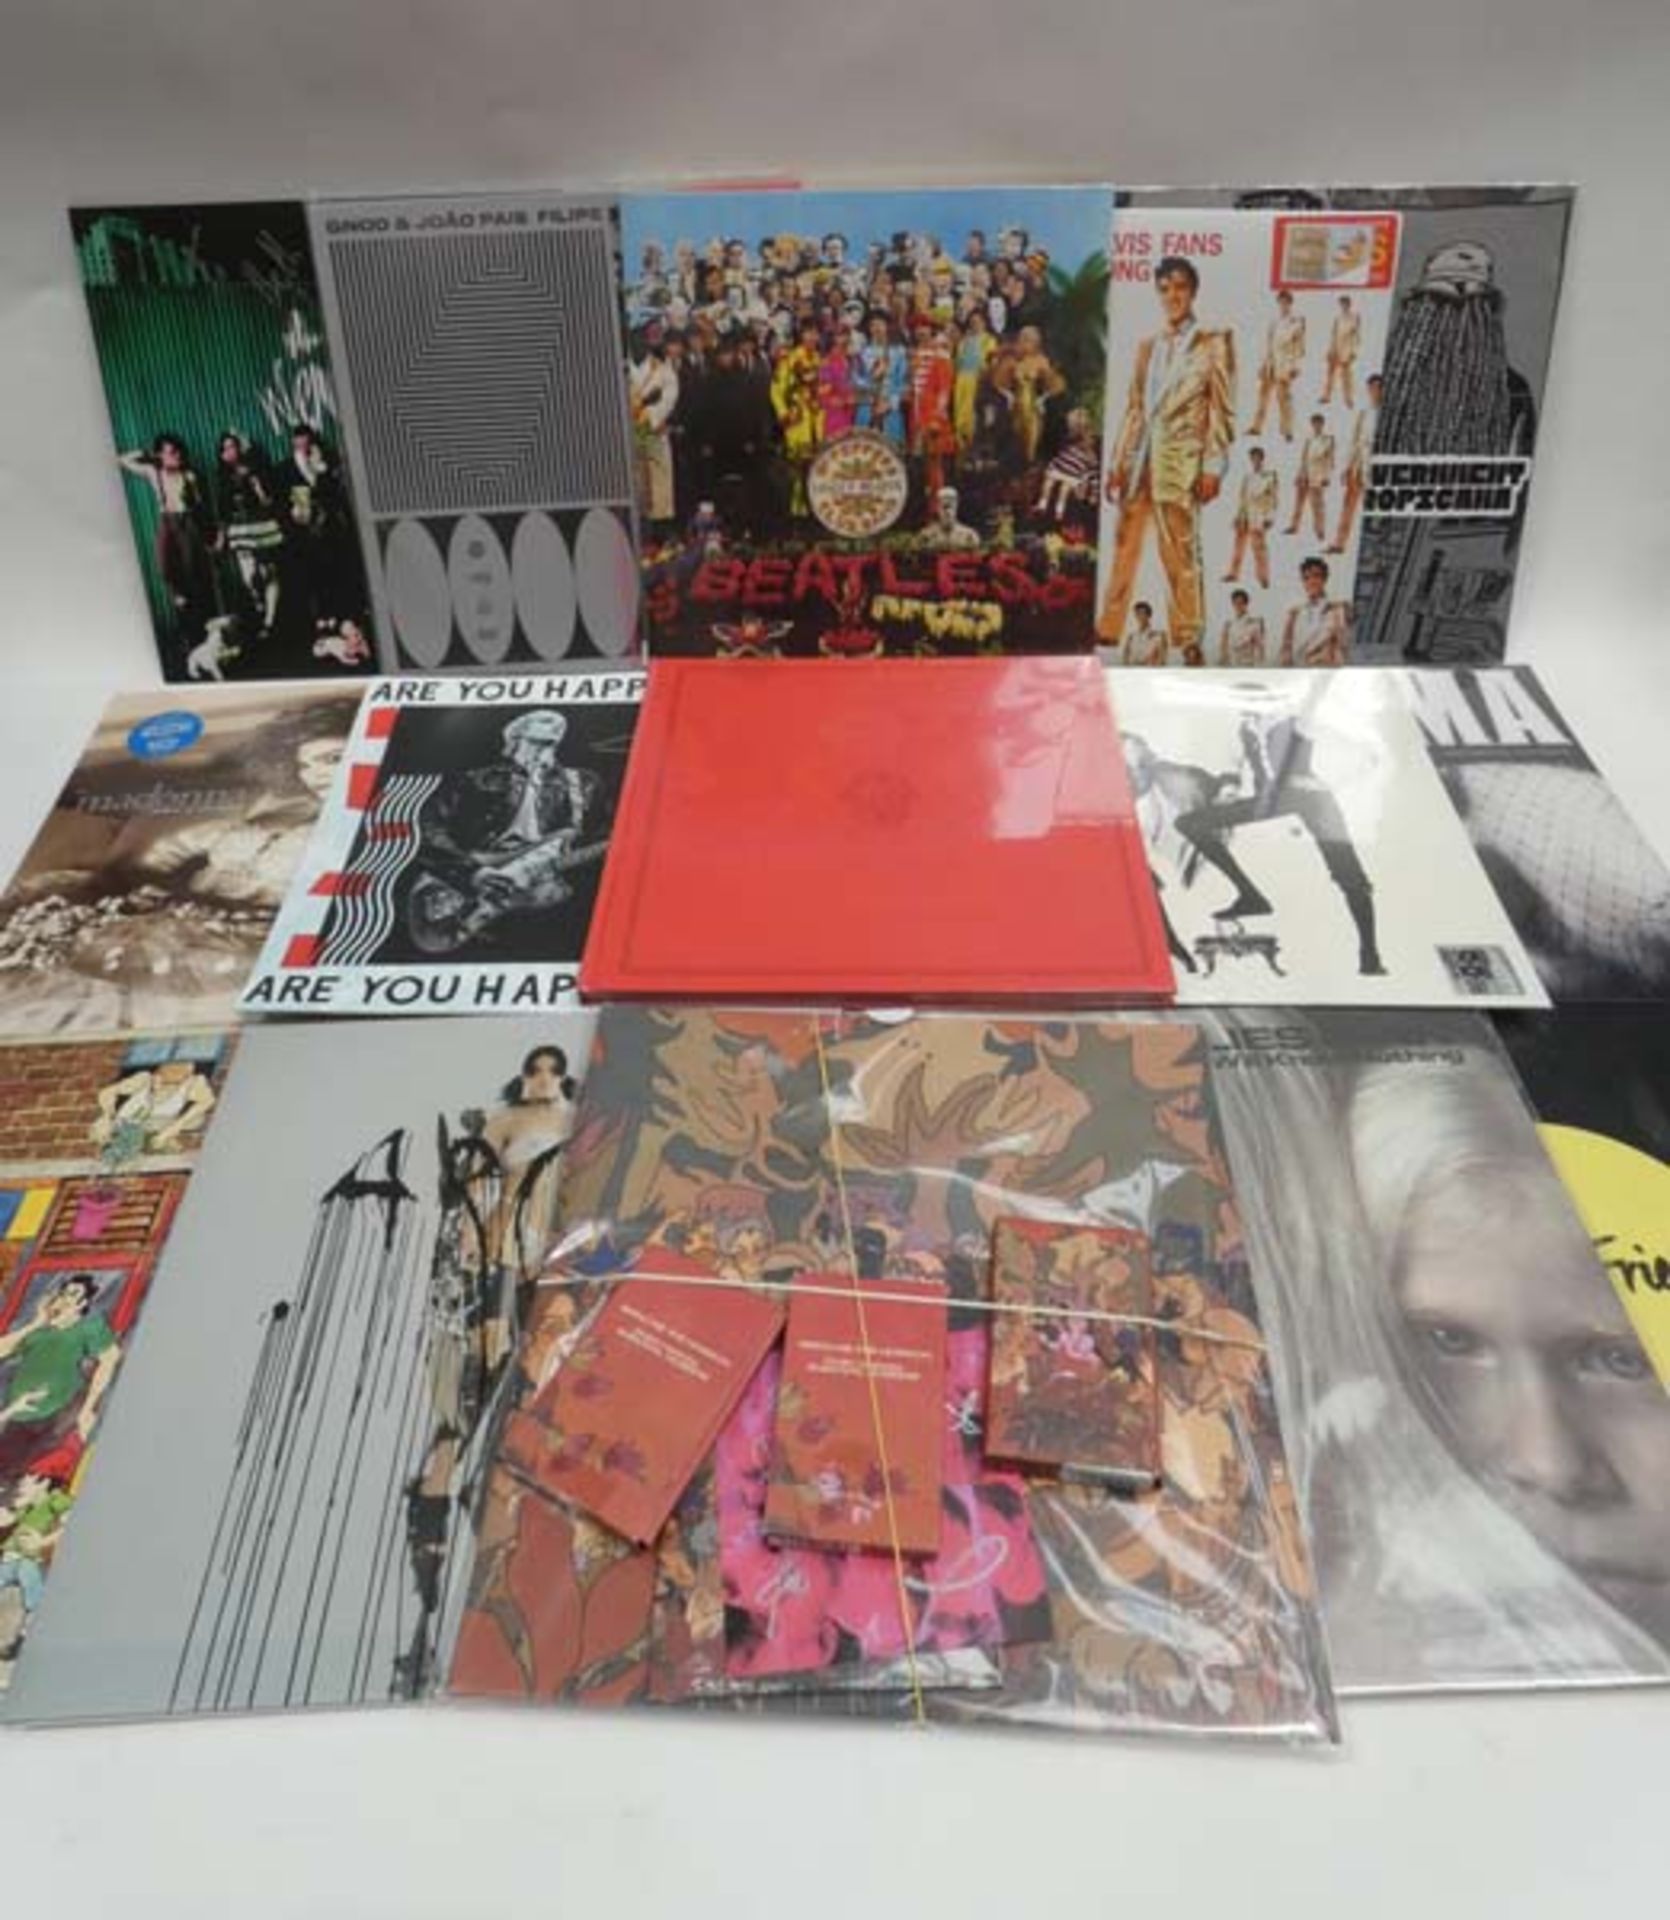 Box of LP records to include The Beatles, Madonna, Fleetwood Mac, Elvis and others